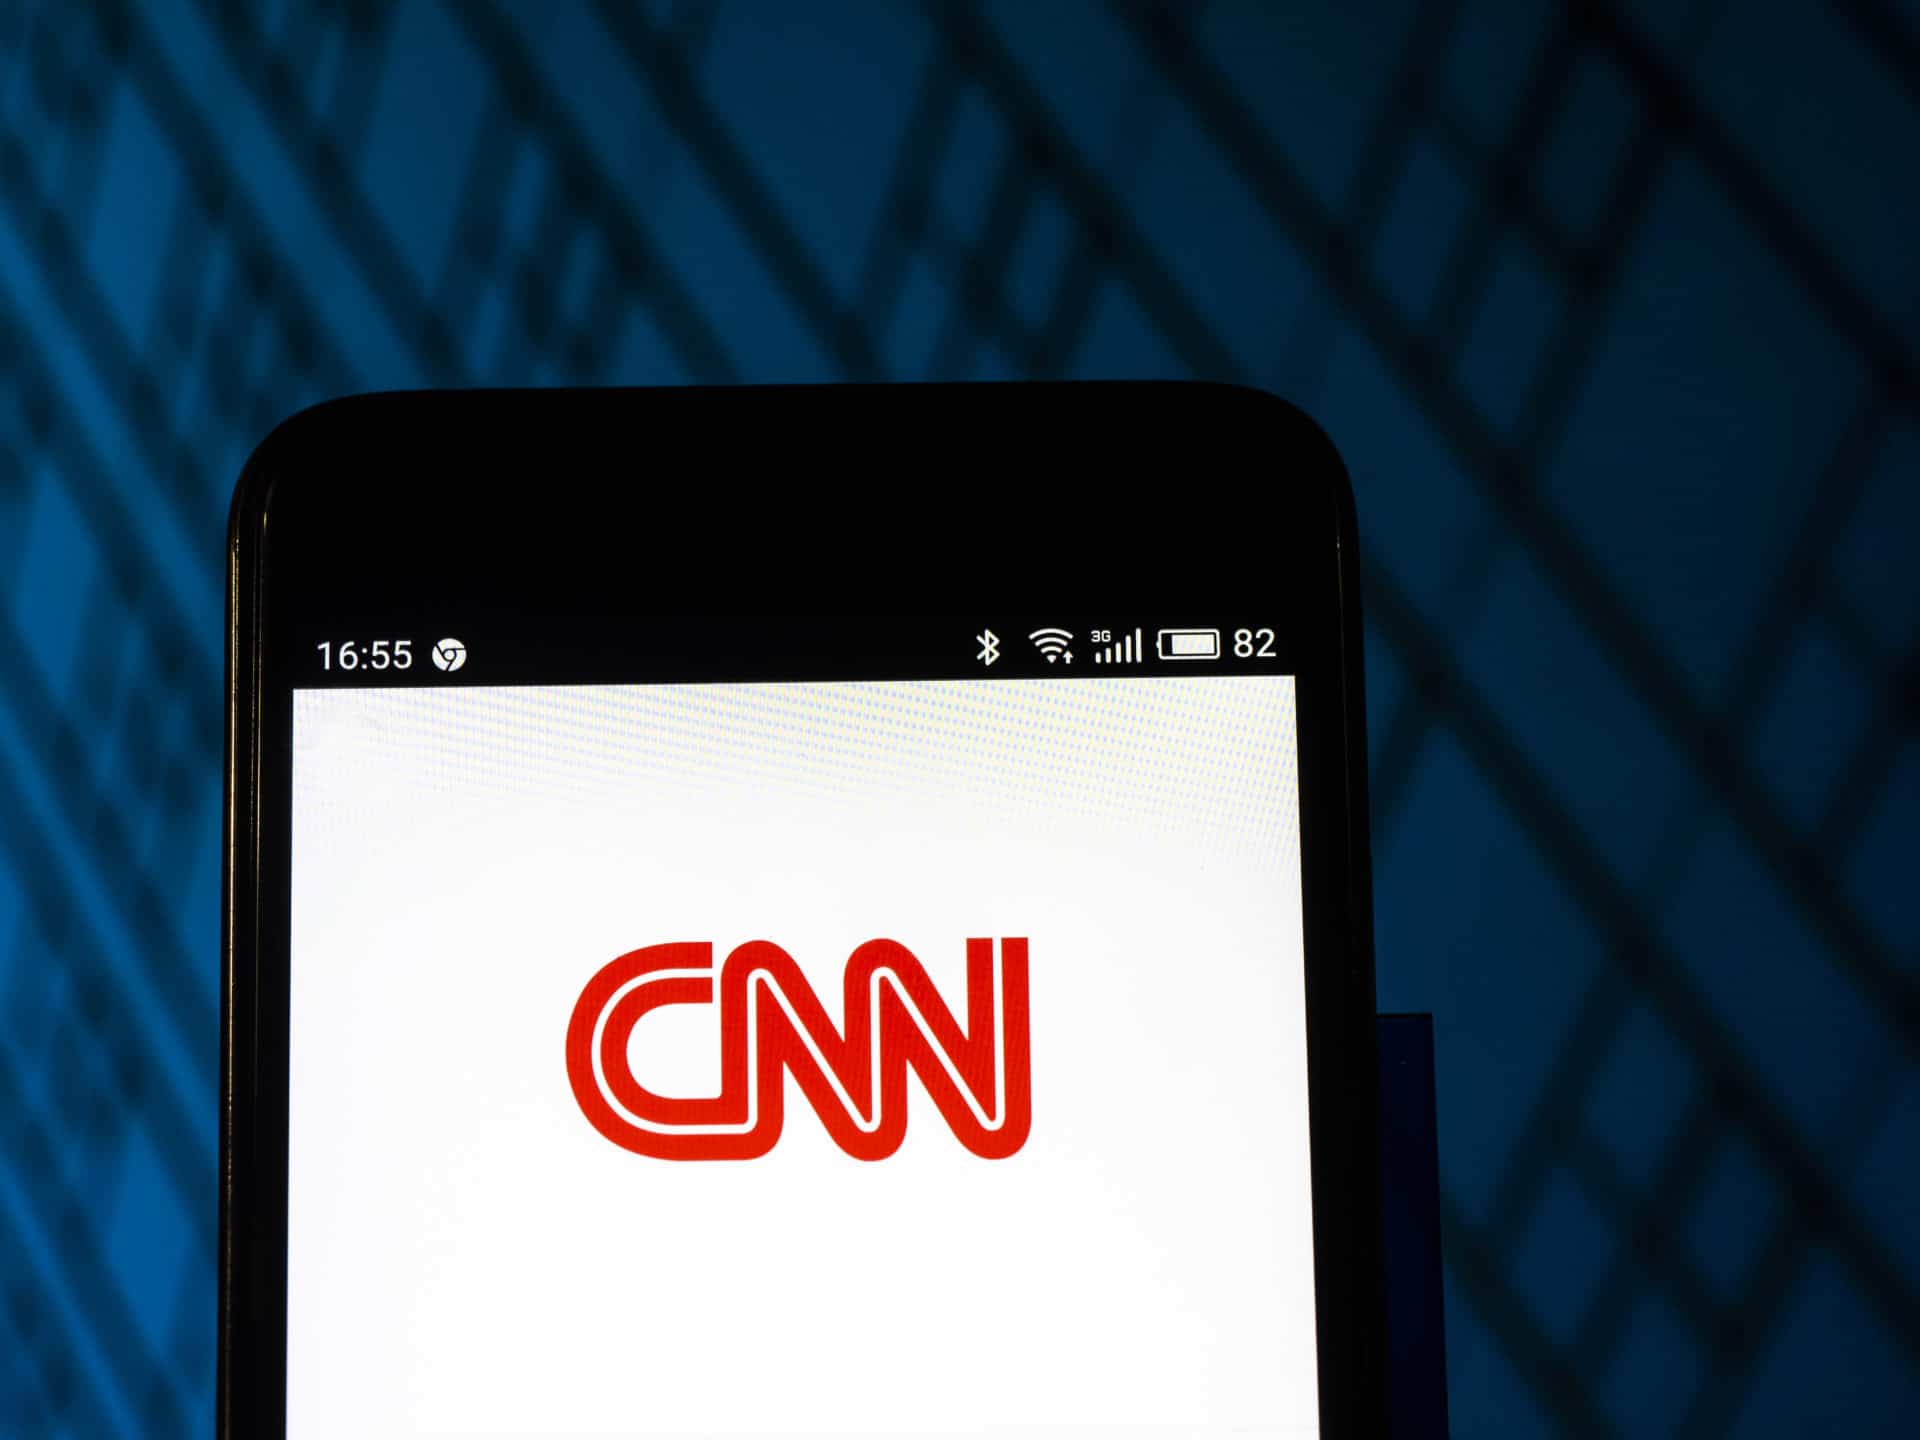 CNN Under Fire For Its Lack of Representation In Leadership Positions